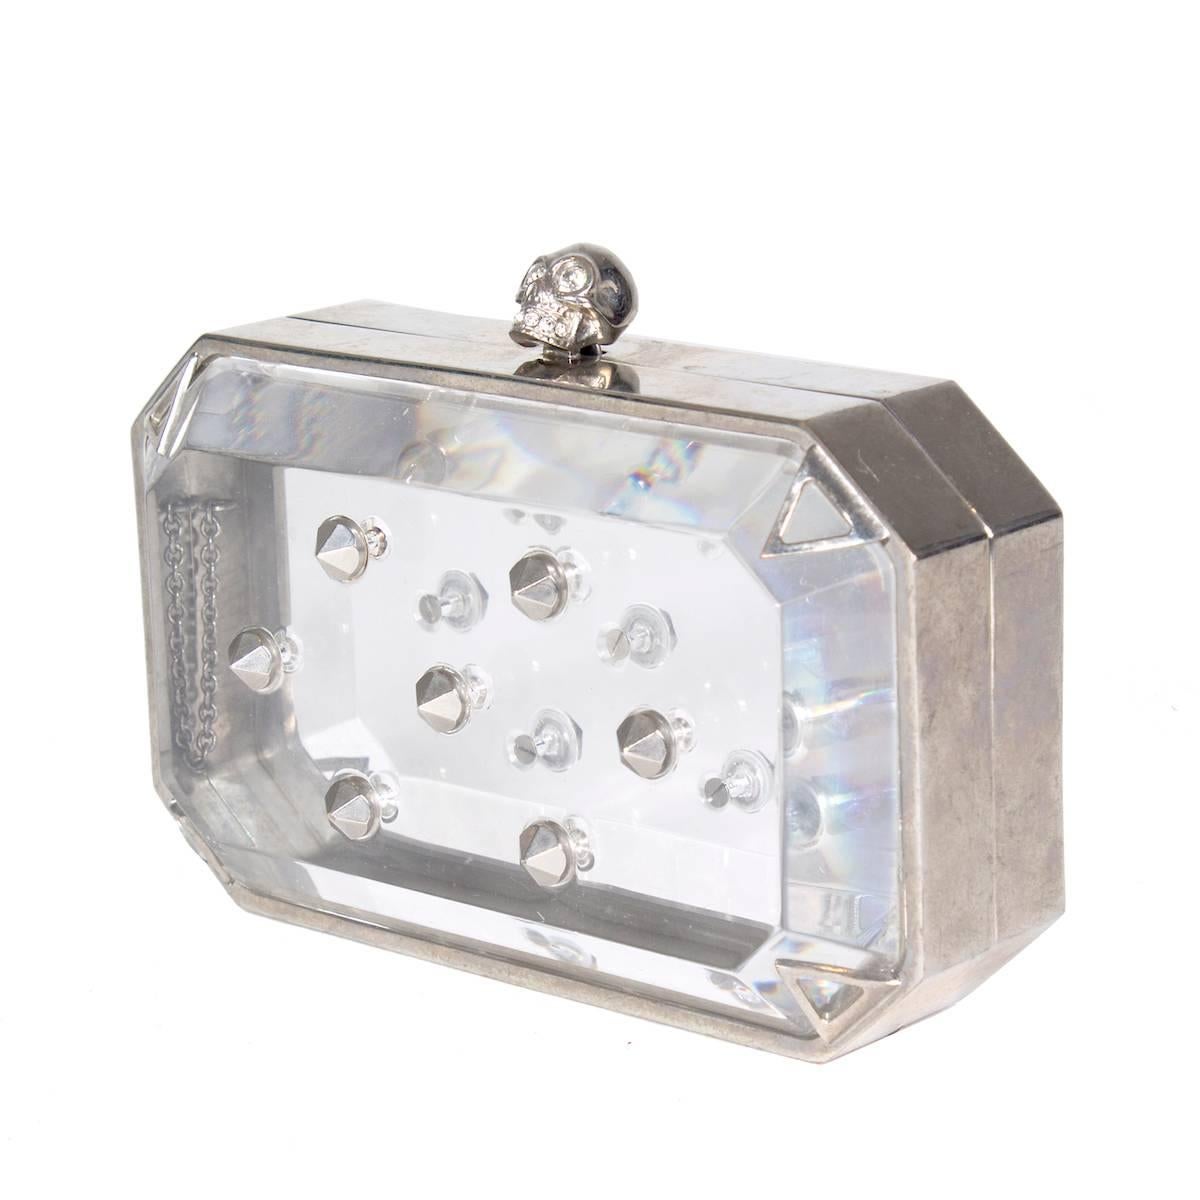 This is a clutch by Alexander McQueen.  It is a metal frame with clear lucite panels that are pierced with cone studs.  The top has a skull ornament toggle closure. 